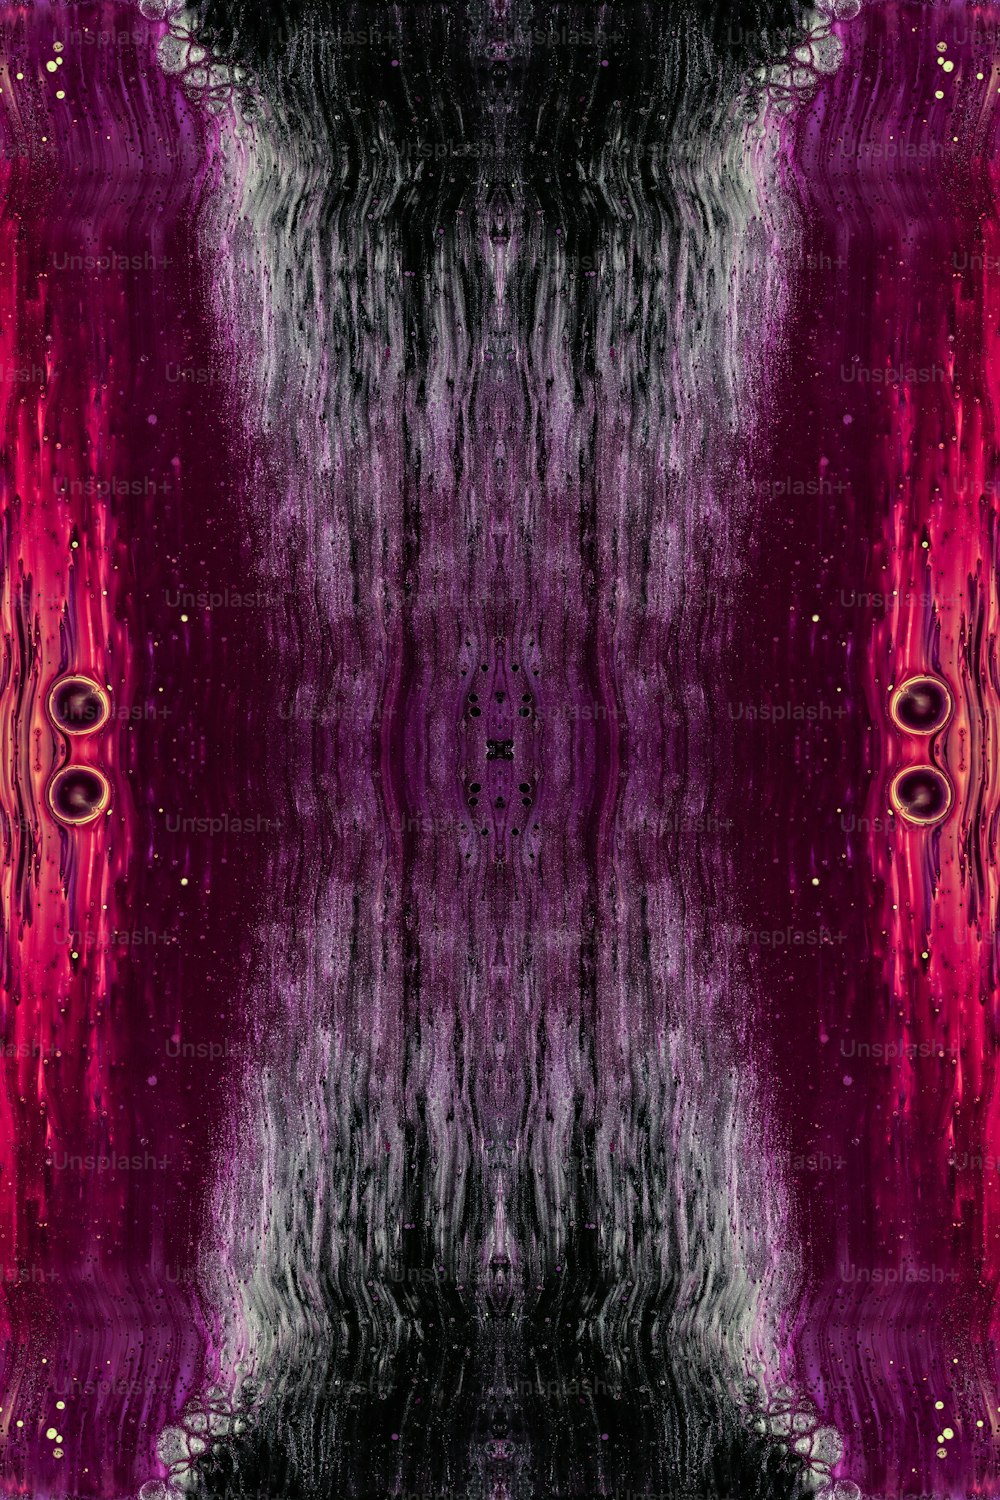 an abstract image of a purple and black background